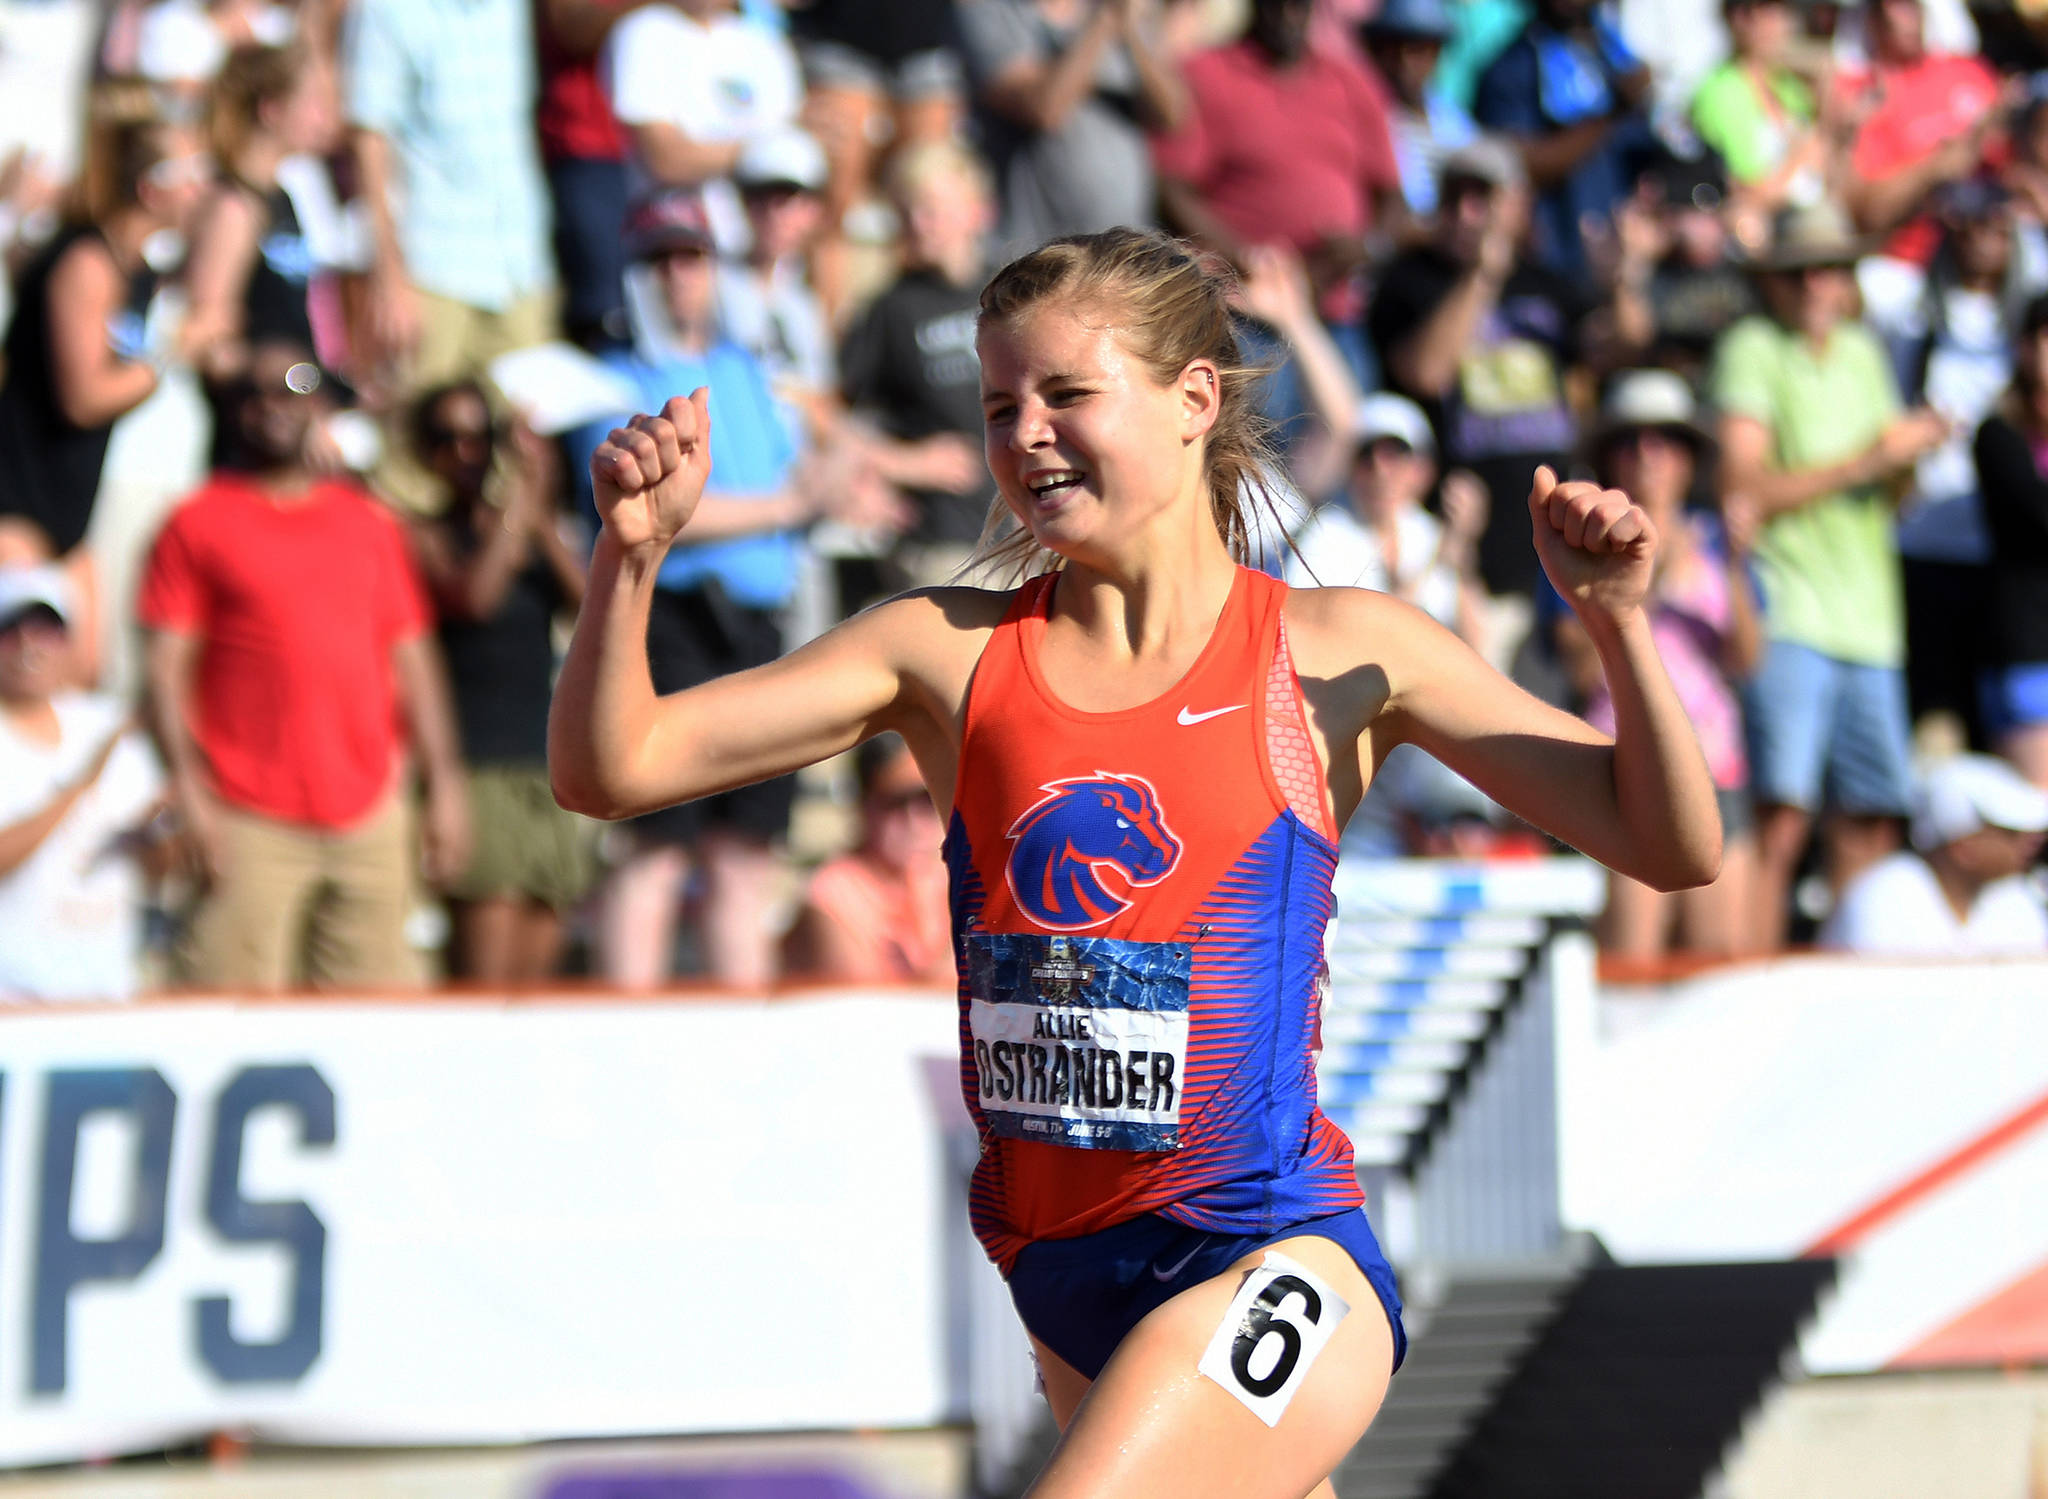 Boise State redshirt junior and Kenai Central graduate Allie Ostrander throws up her arms after winning the women’s 3,000-meter steeplechase title Saturday, June 8, 2019, at the Div. I track and field championships in Austin, Texas. (Photo provided by Boise State Athletics)